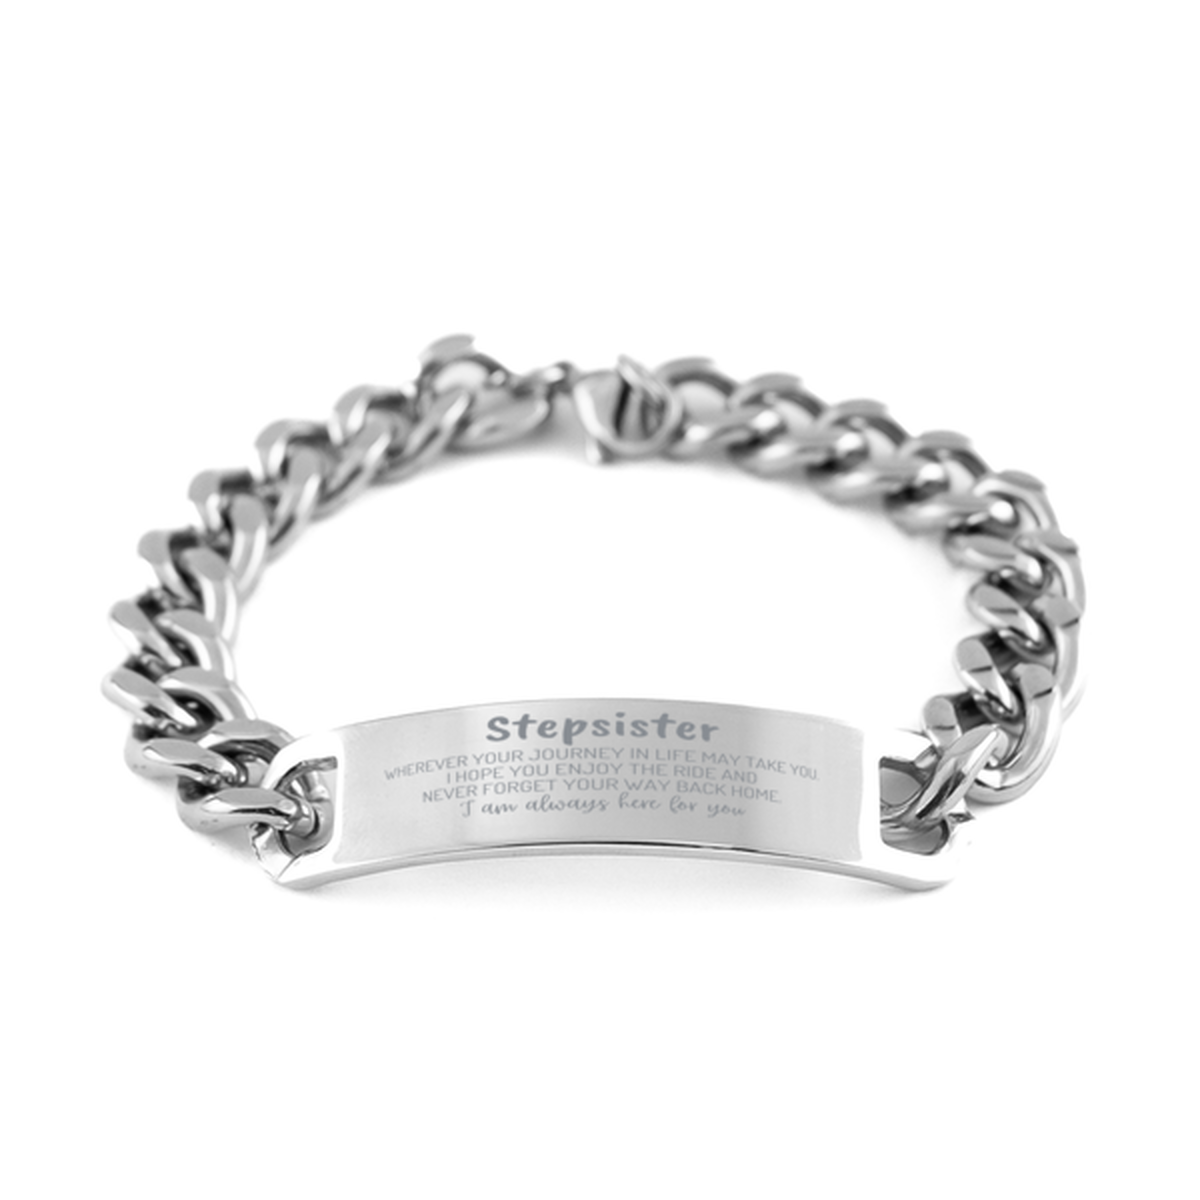 Stepsister wherever your journey in life may take you, I am always here for you Stepsister Cuban Chain Stainless Steel Bracelet, Awesome Christmas Gifts For Stepsister, Stepsister Birthday Gifts for Men Women Family Loved One